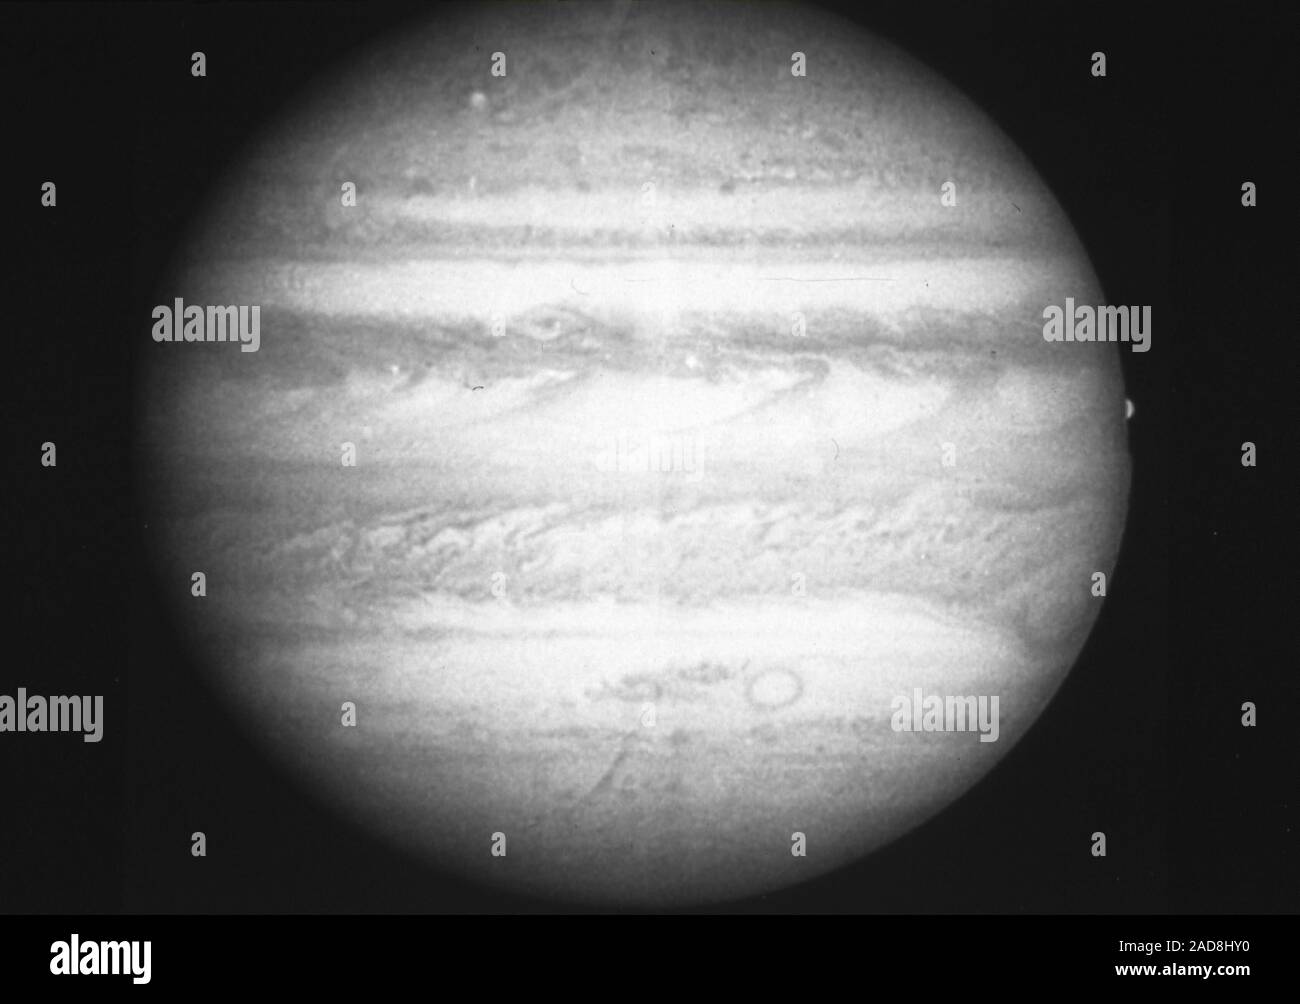 This black and white picture of Jupiter, taken in green light at 1:14 a.m. on the 11th March, 1991 by the Planetary Camera on NASA's Hubble Space Telescope, shows a wealth of fine detail in the clouds that cover the planet. The Great Red Spot is seen at the lower right, also on the right near the equator the satellite Europa is disappearing behind the limb of the planet. The dark 'j' shaped clouds along the equator are the result of a pattern of intense jet streams in the Jovian atmosphere. This picture is as sharp as the Voyager pictures taken five days before the closest approach in 1979. Stock Photo